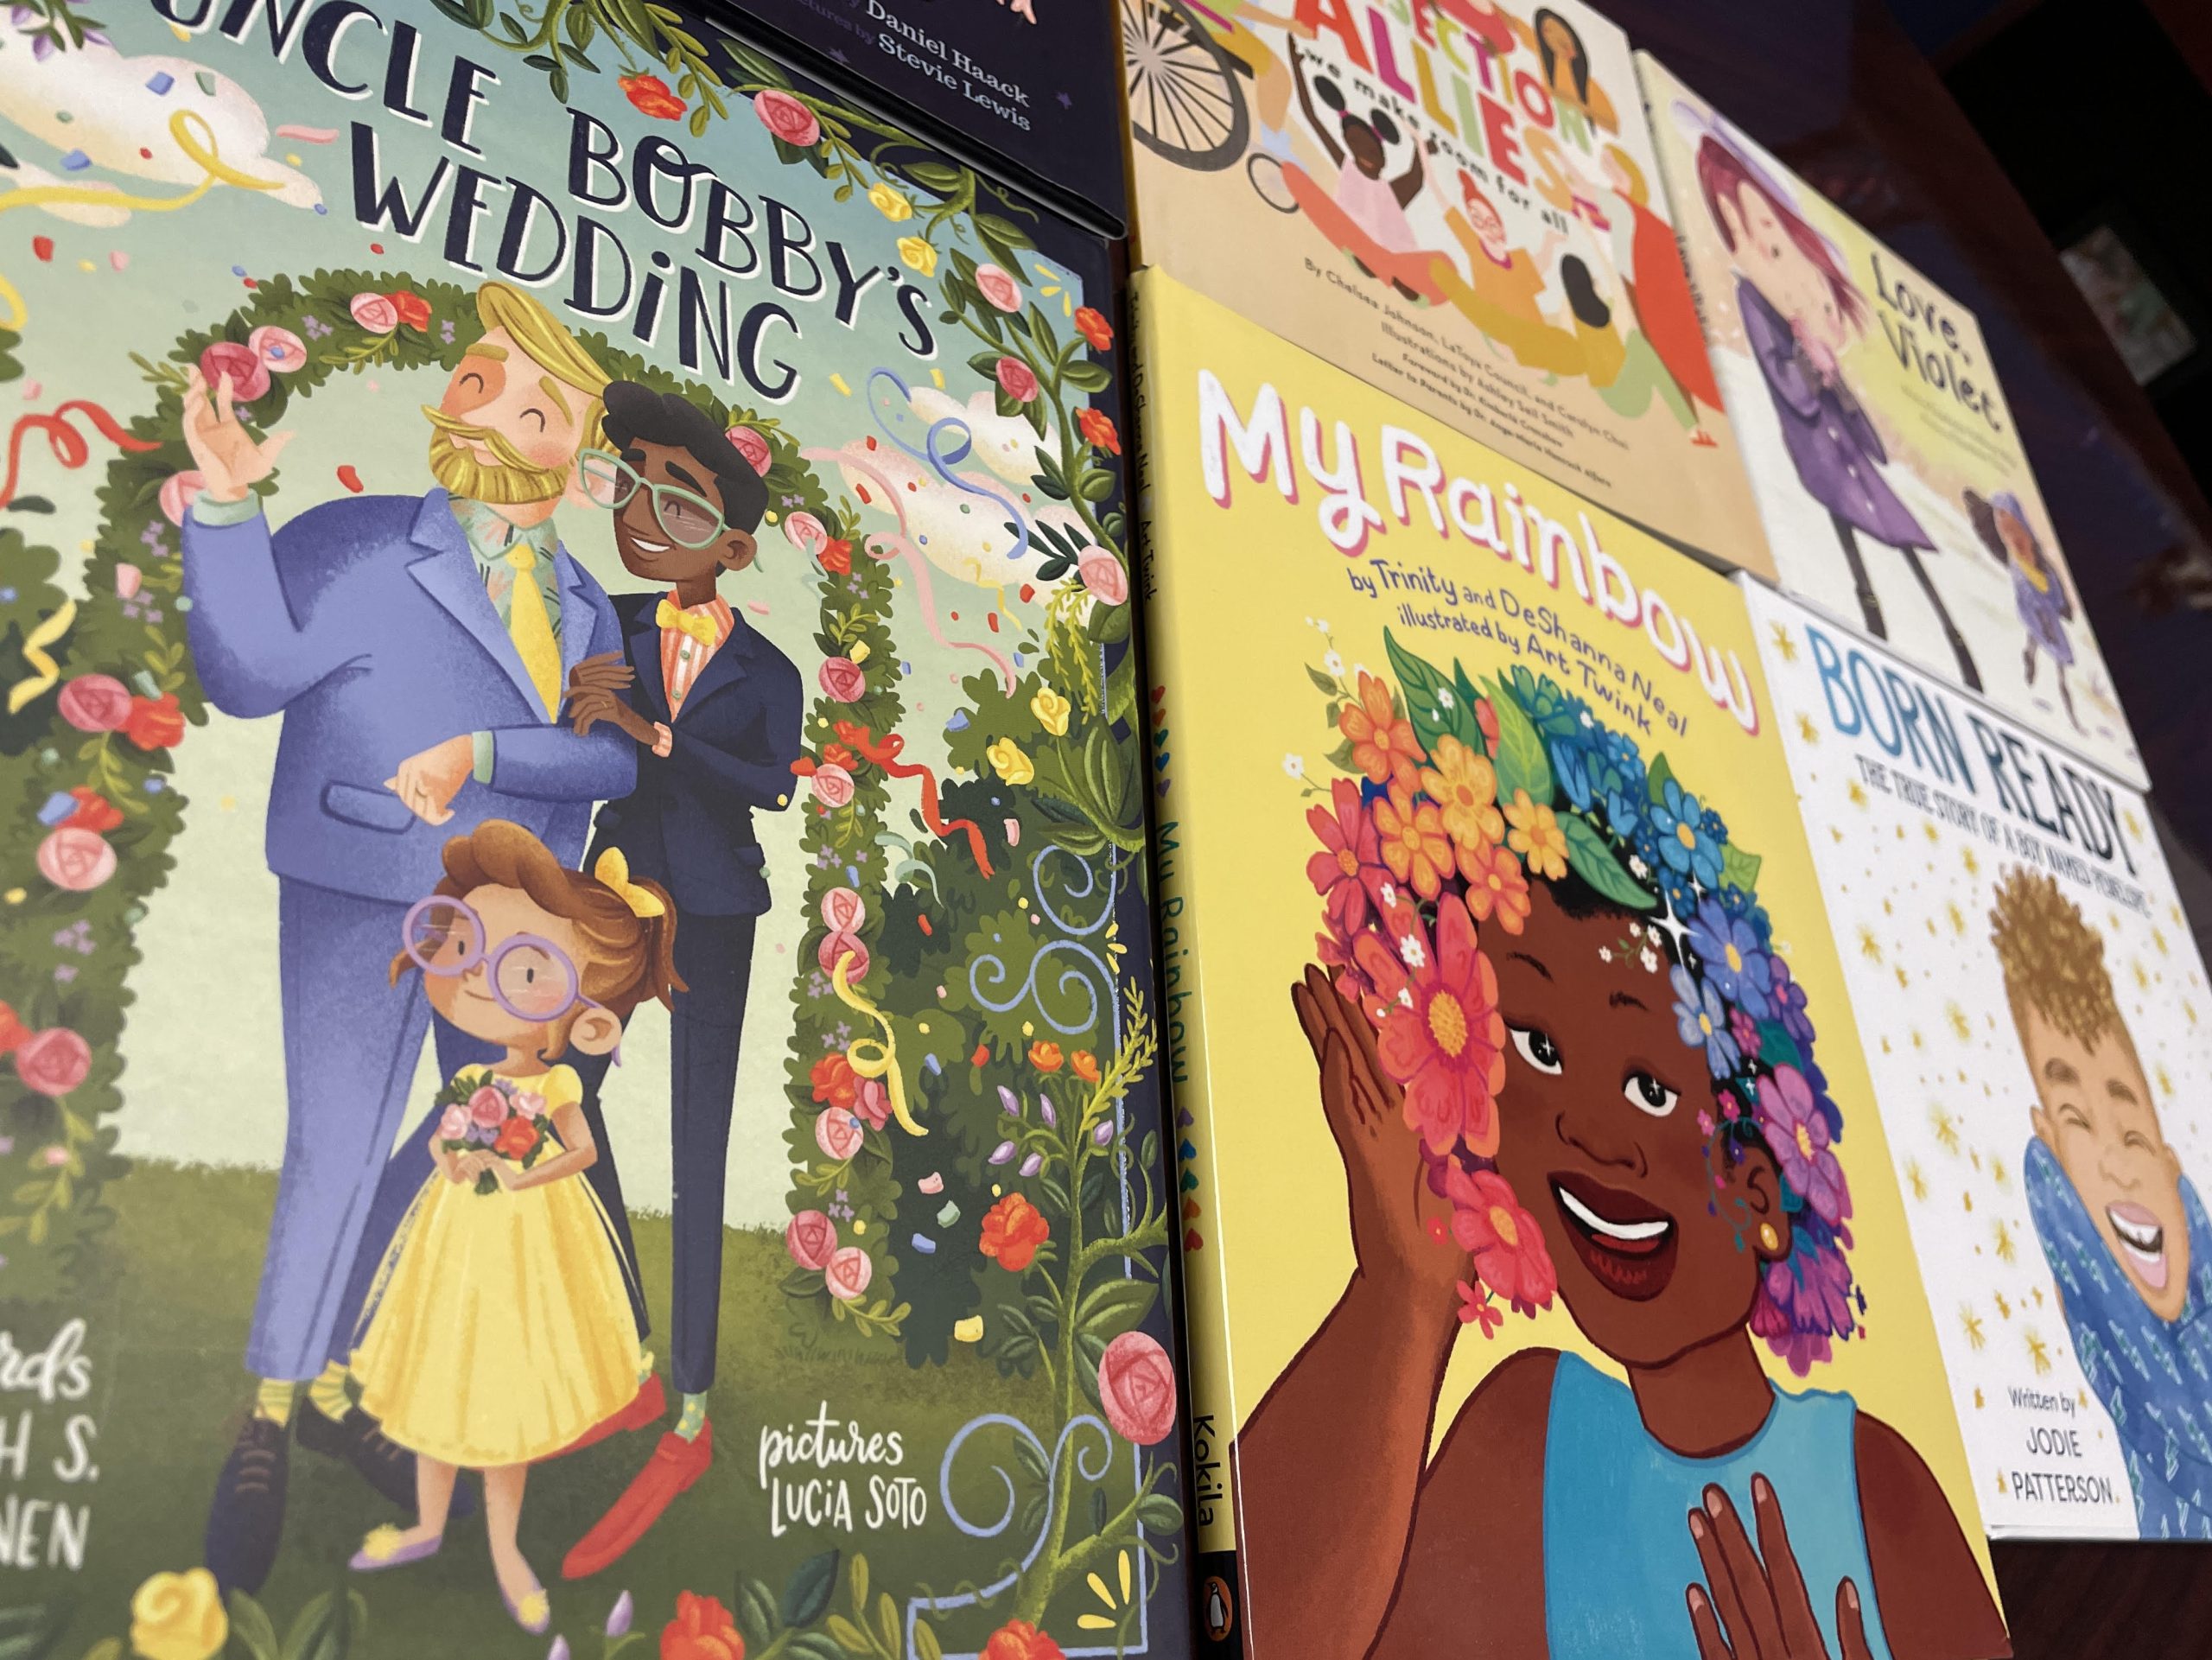  Maryland Attorney General files brief in support of MCPS inclusive book policy 